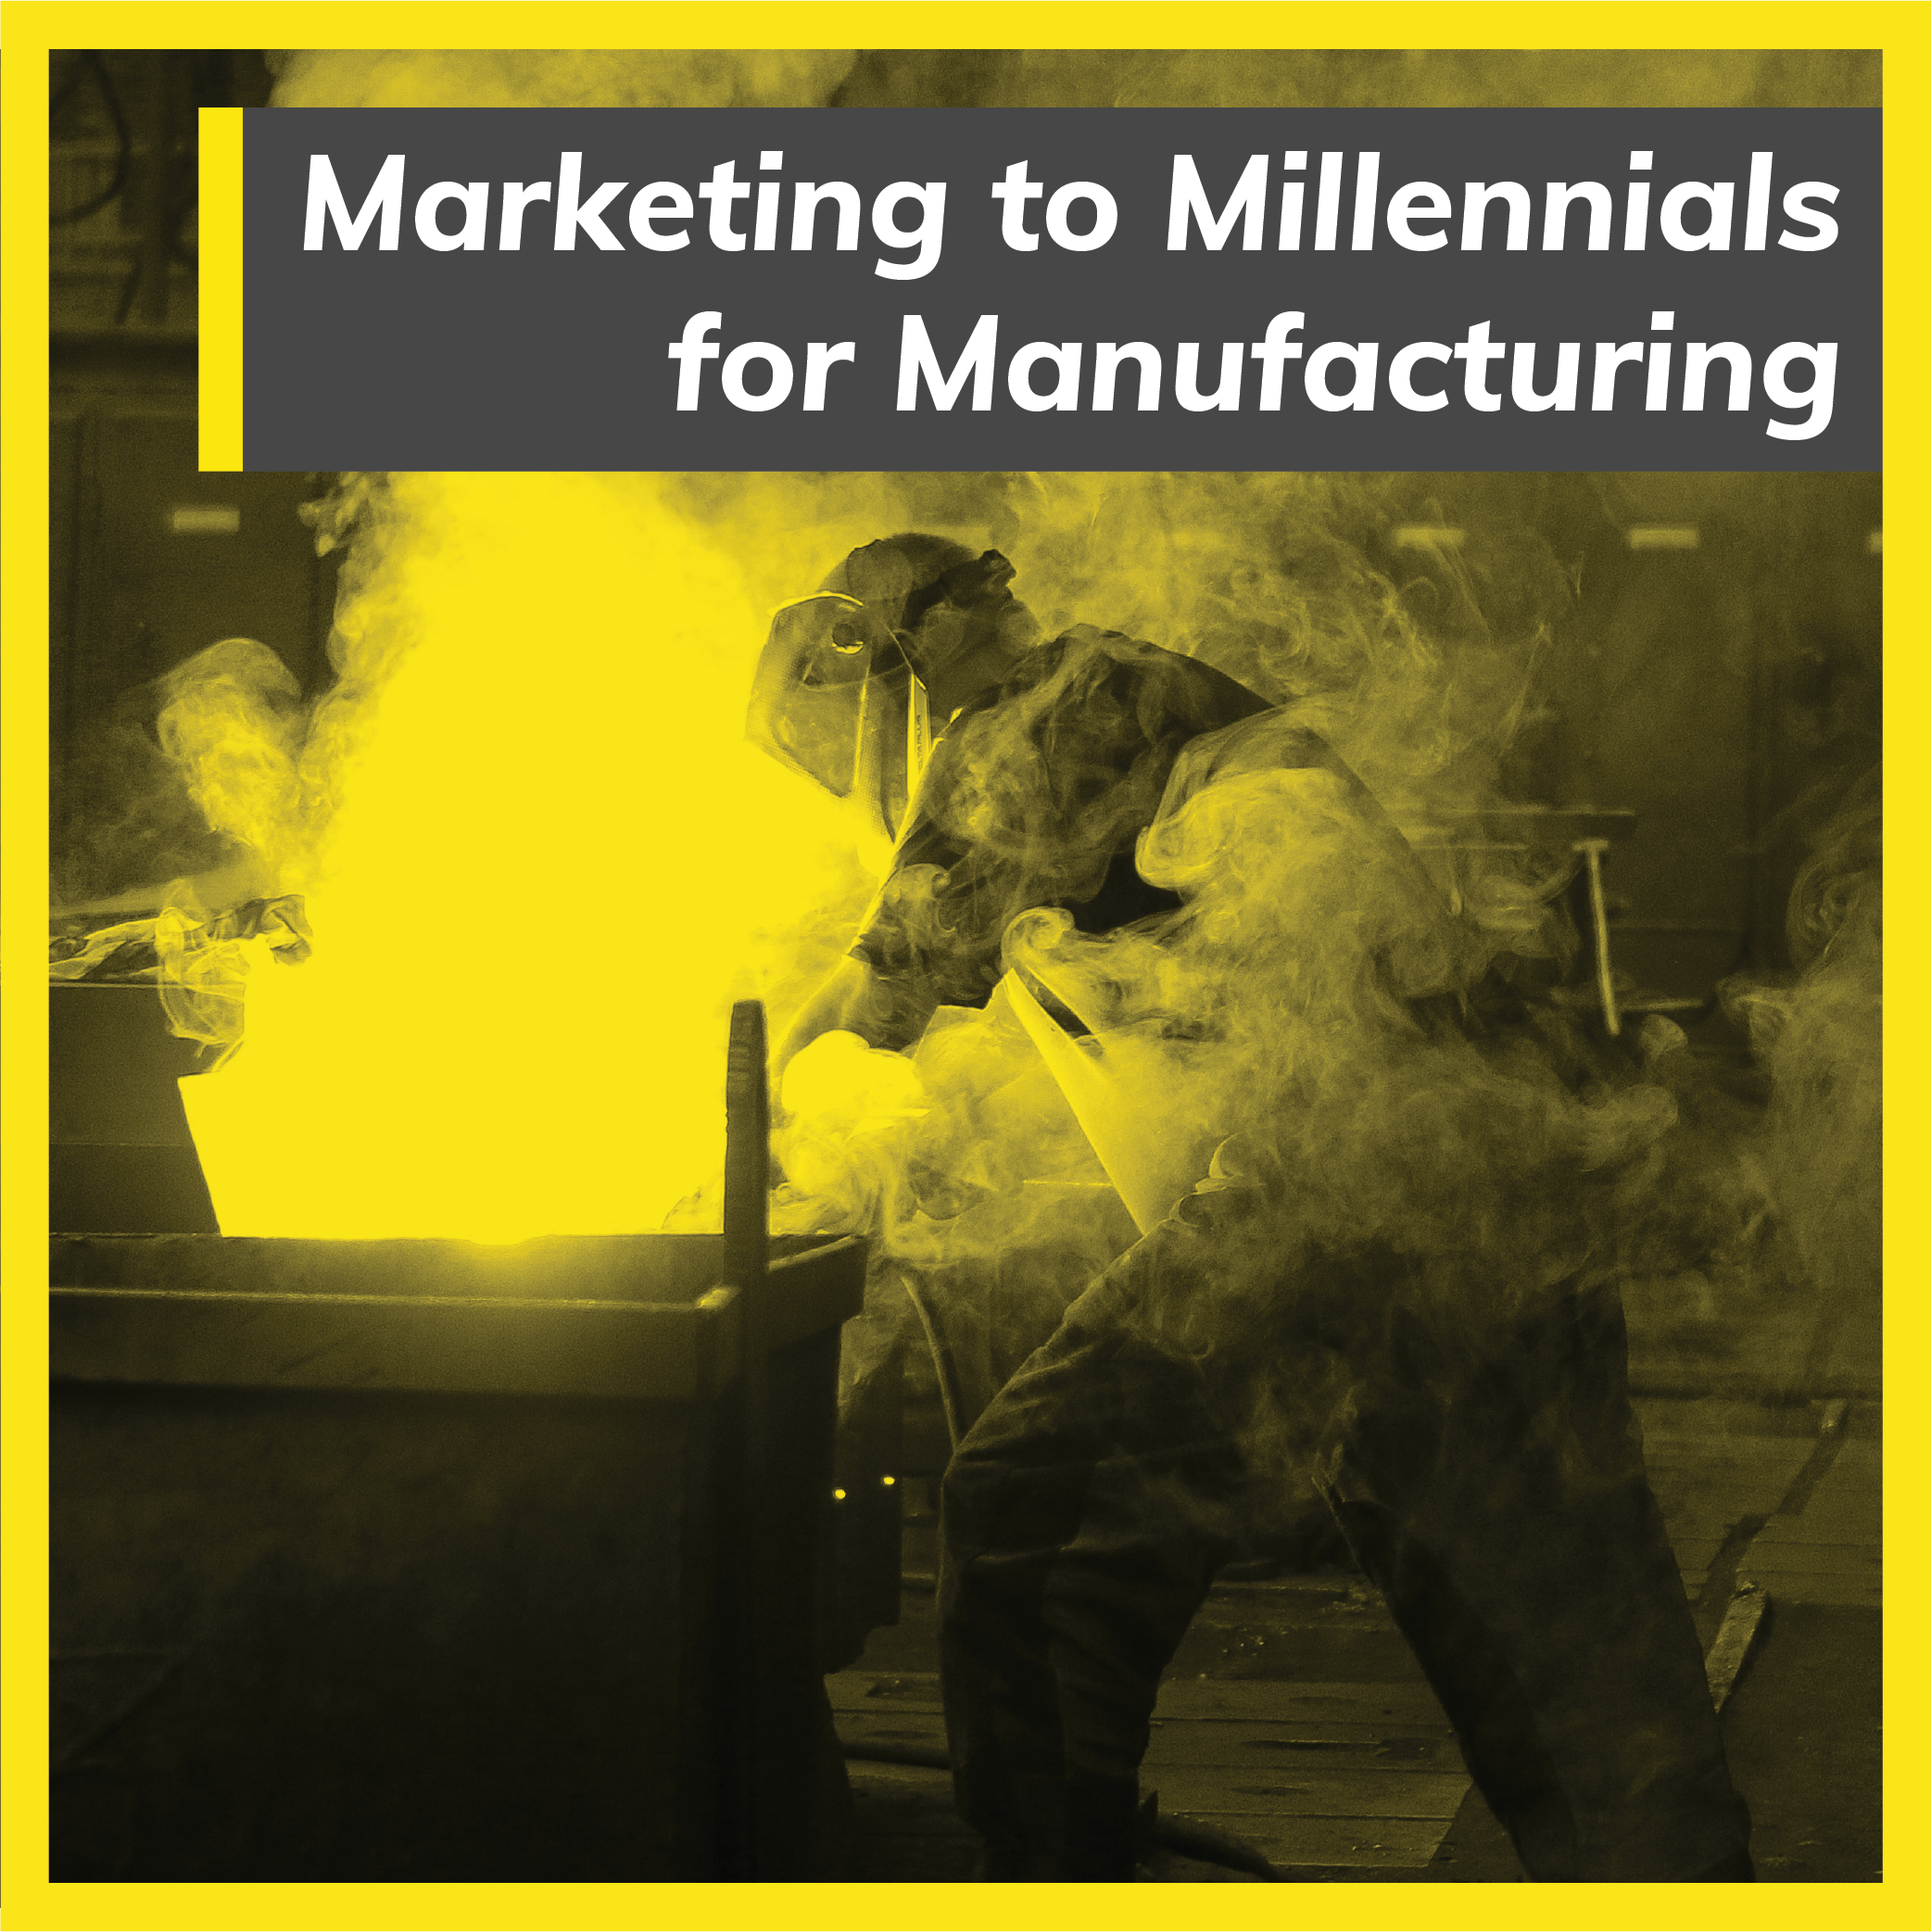 Marketing to Millennials for Manufacturing